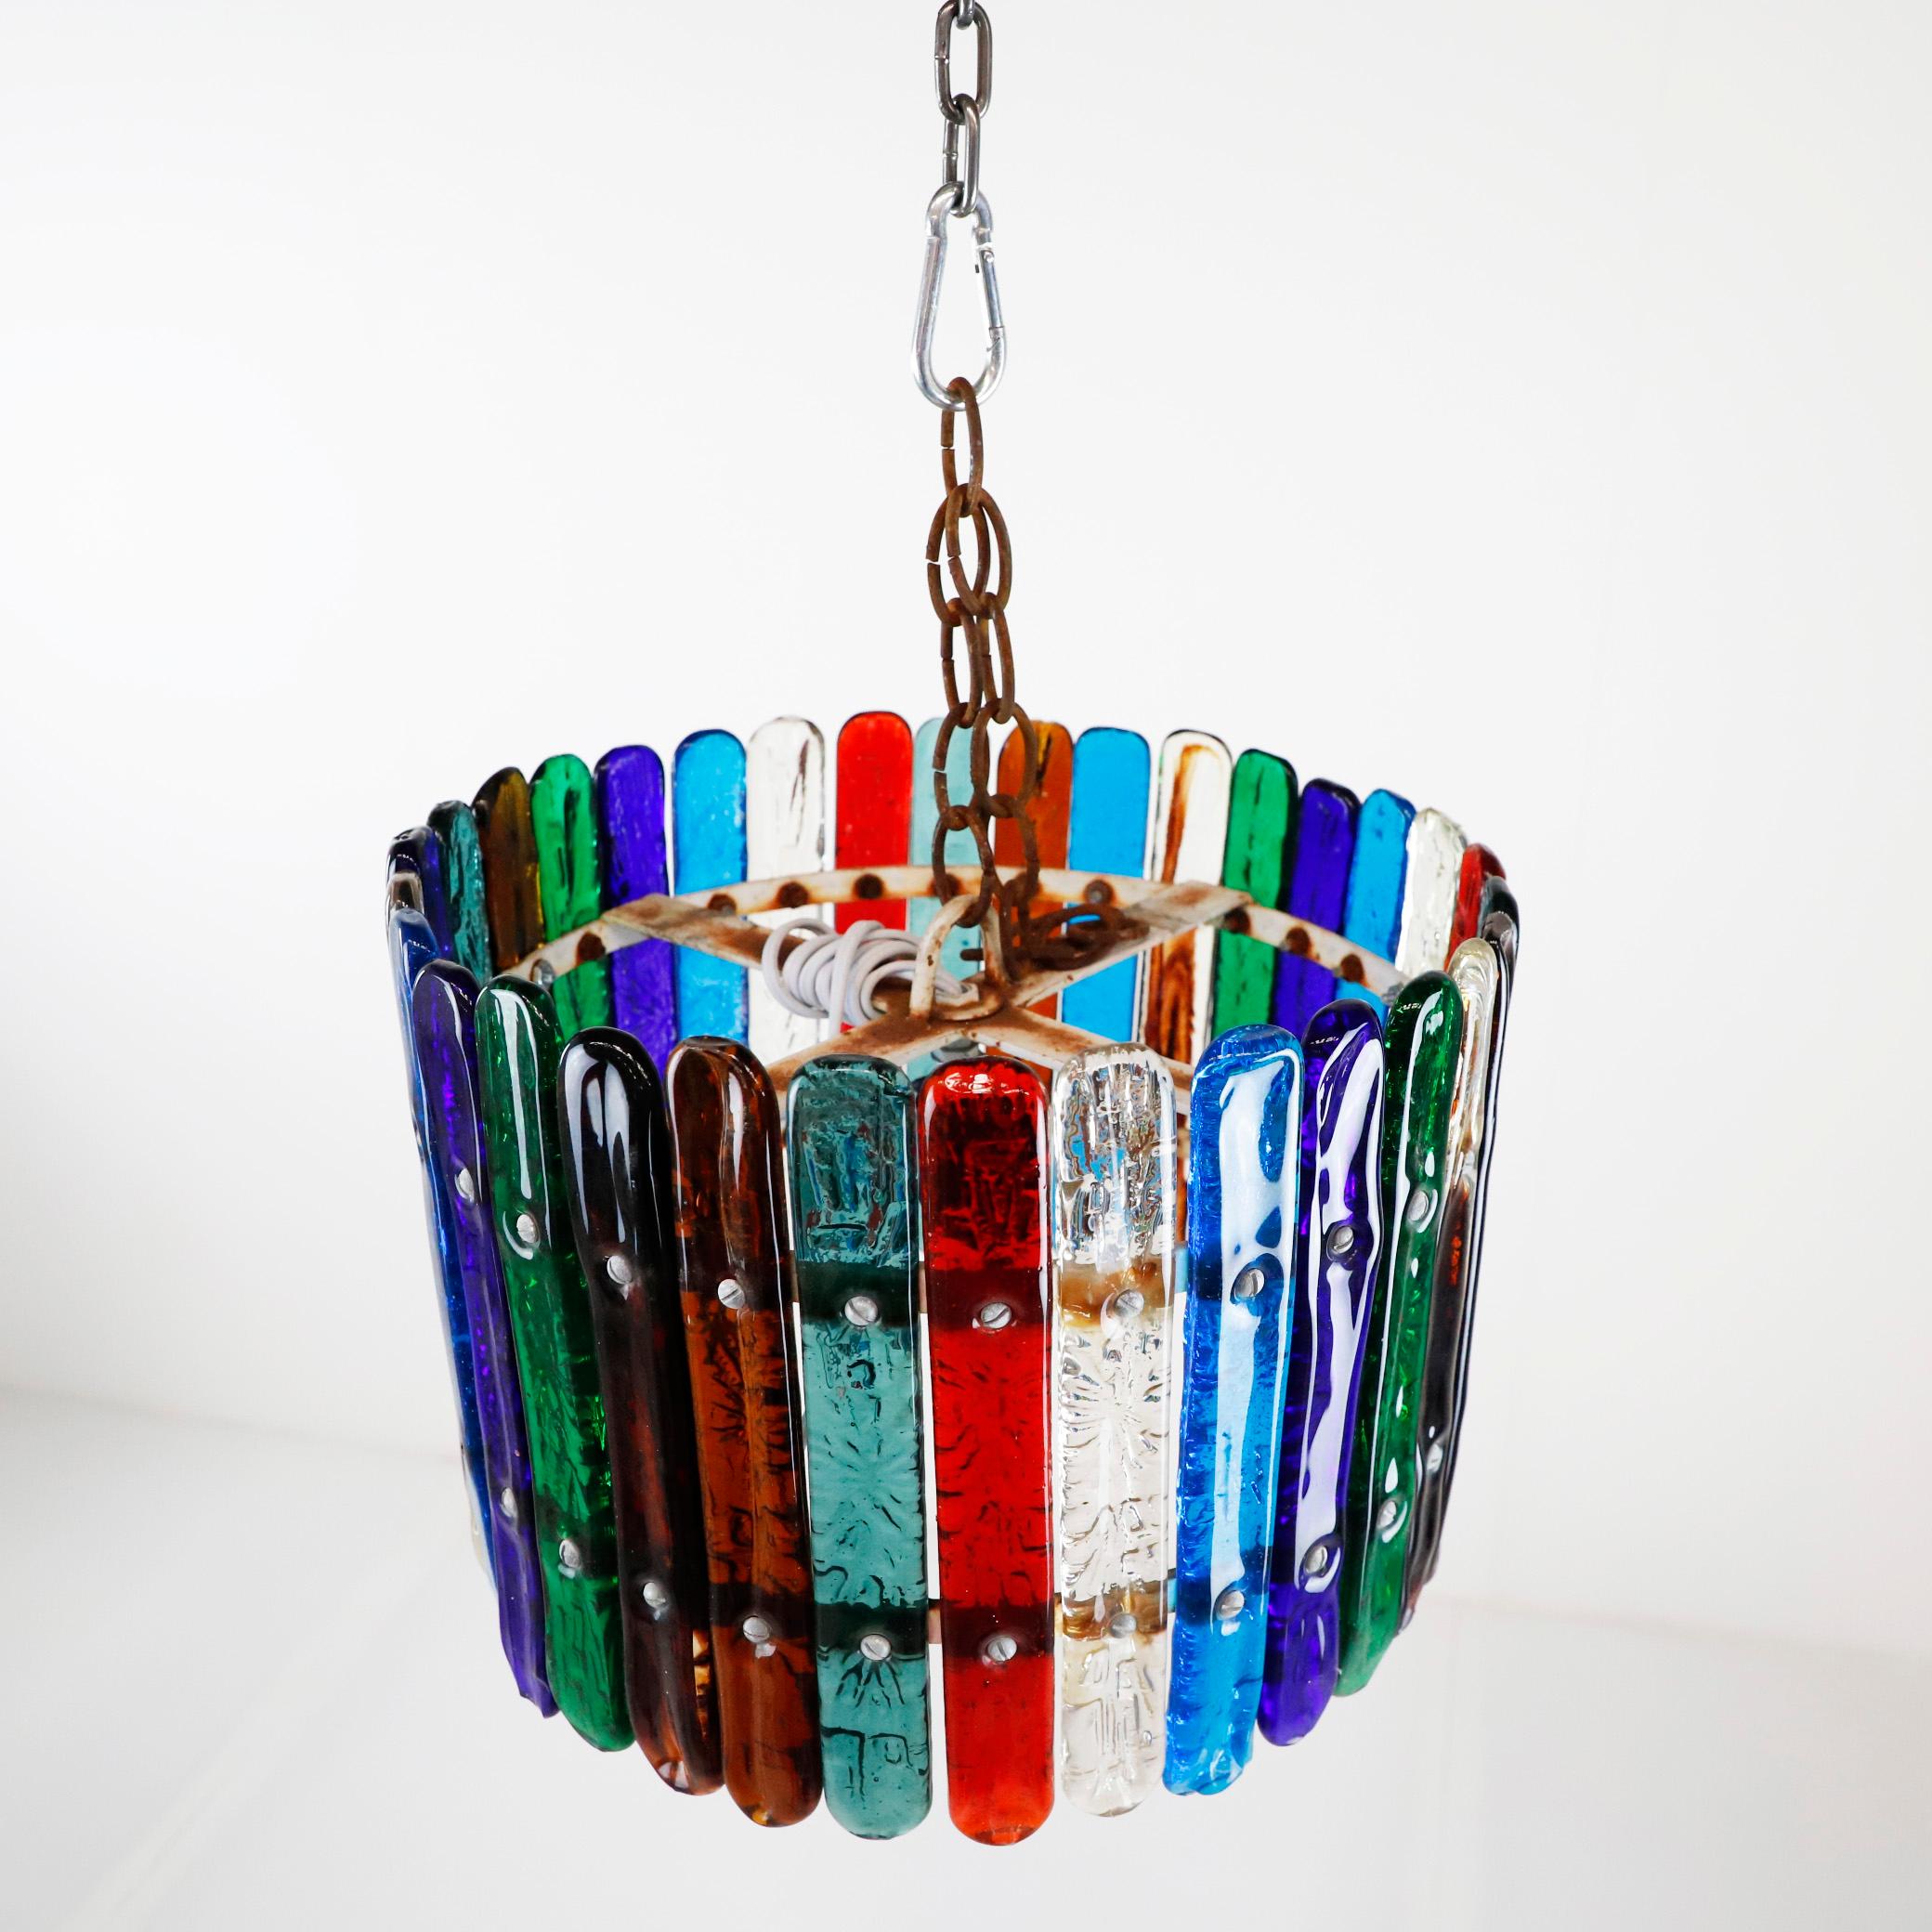 We offer this Feders hand blown glass chandelier designed by Felipe Delfinger, Feders, Cuernavaca, Mexico. Using recycled glass, circa 1970.

